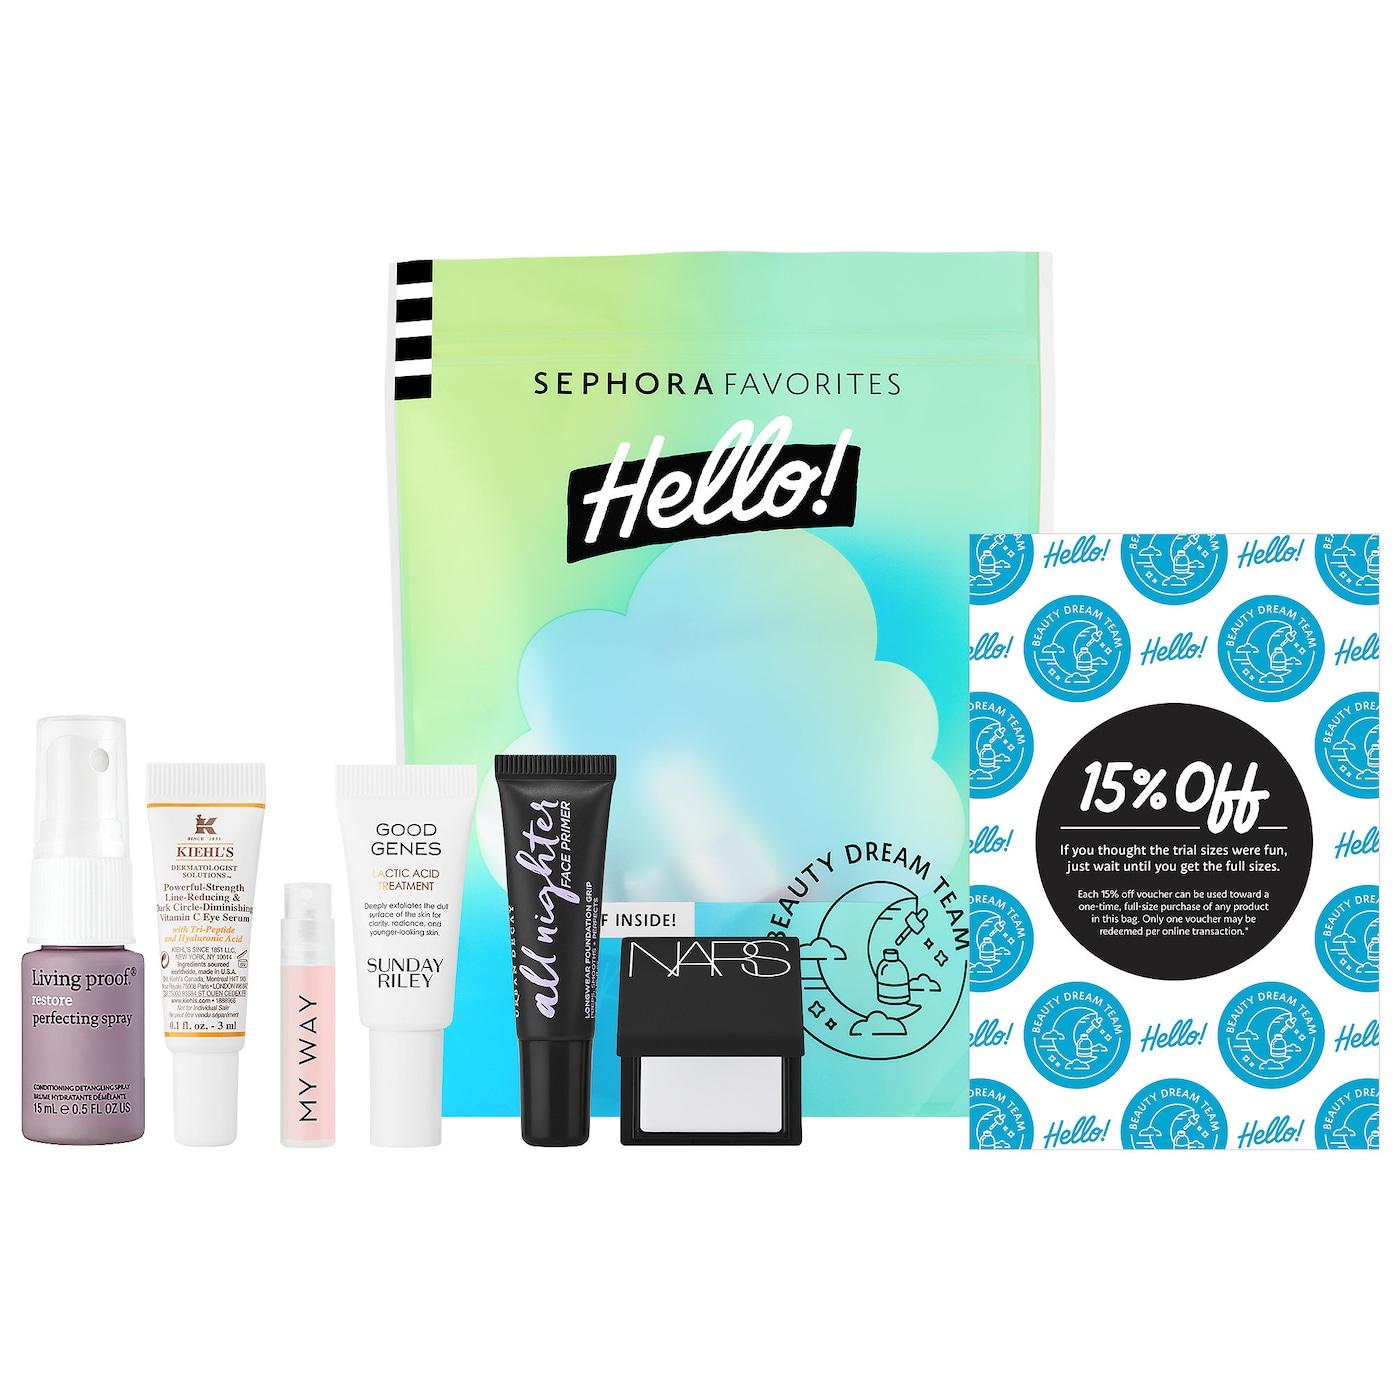 Read more about the article Sephora Favorites Hello! – Beauty Dream Team – On Sale Now + 20% Off!